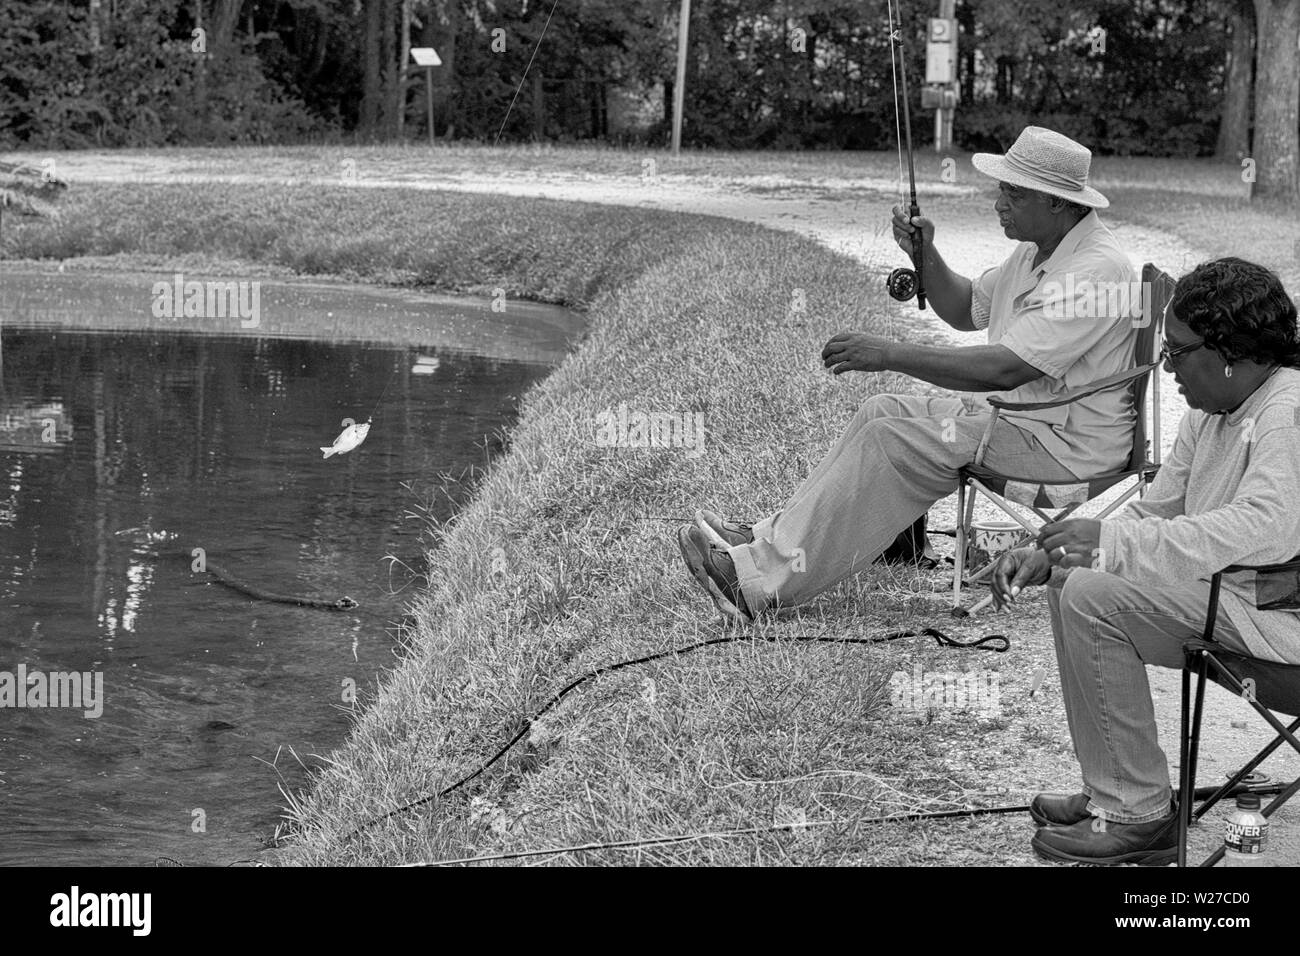 Reeling in a fish at a lake in Fayette, Al. Stock Photo